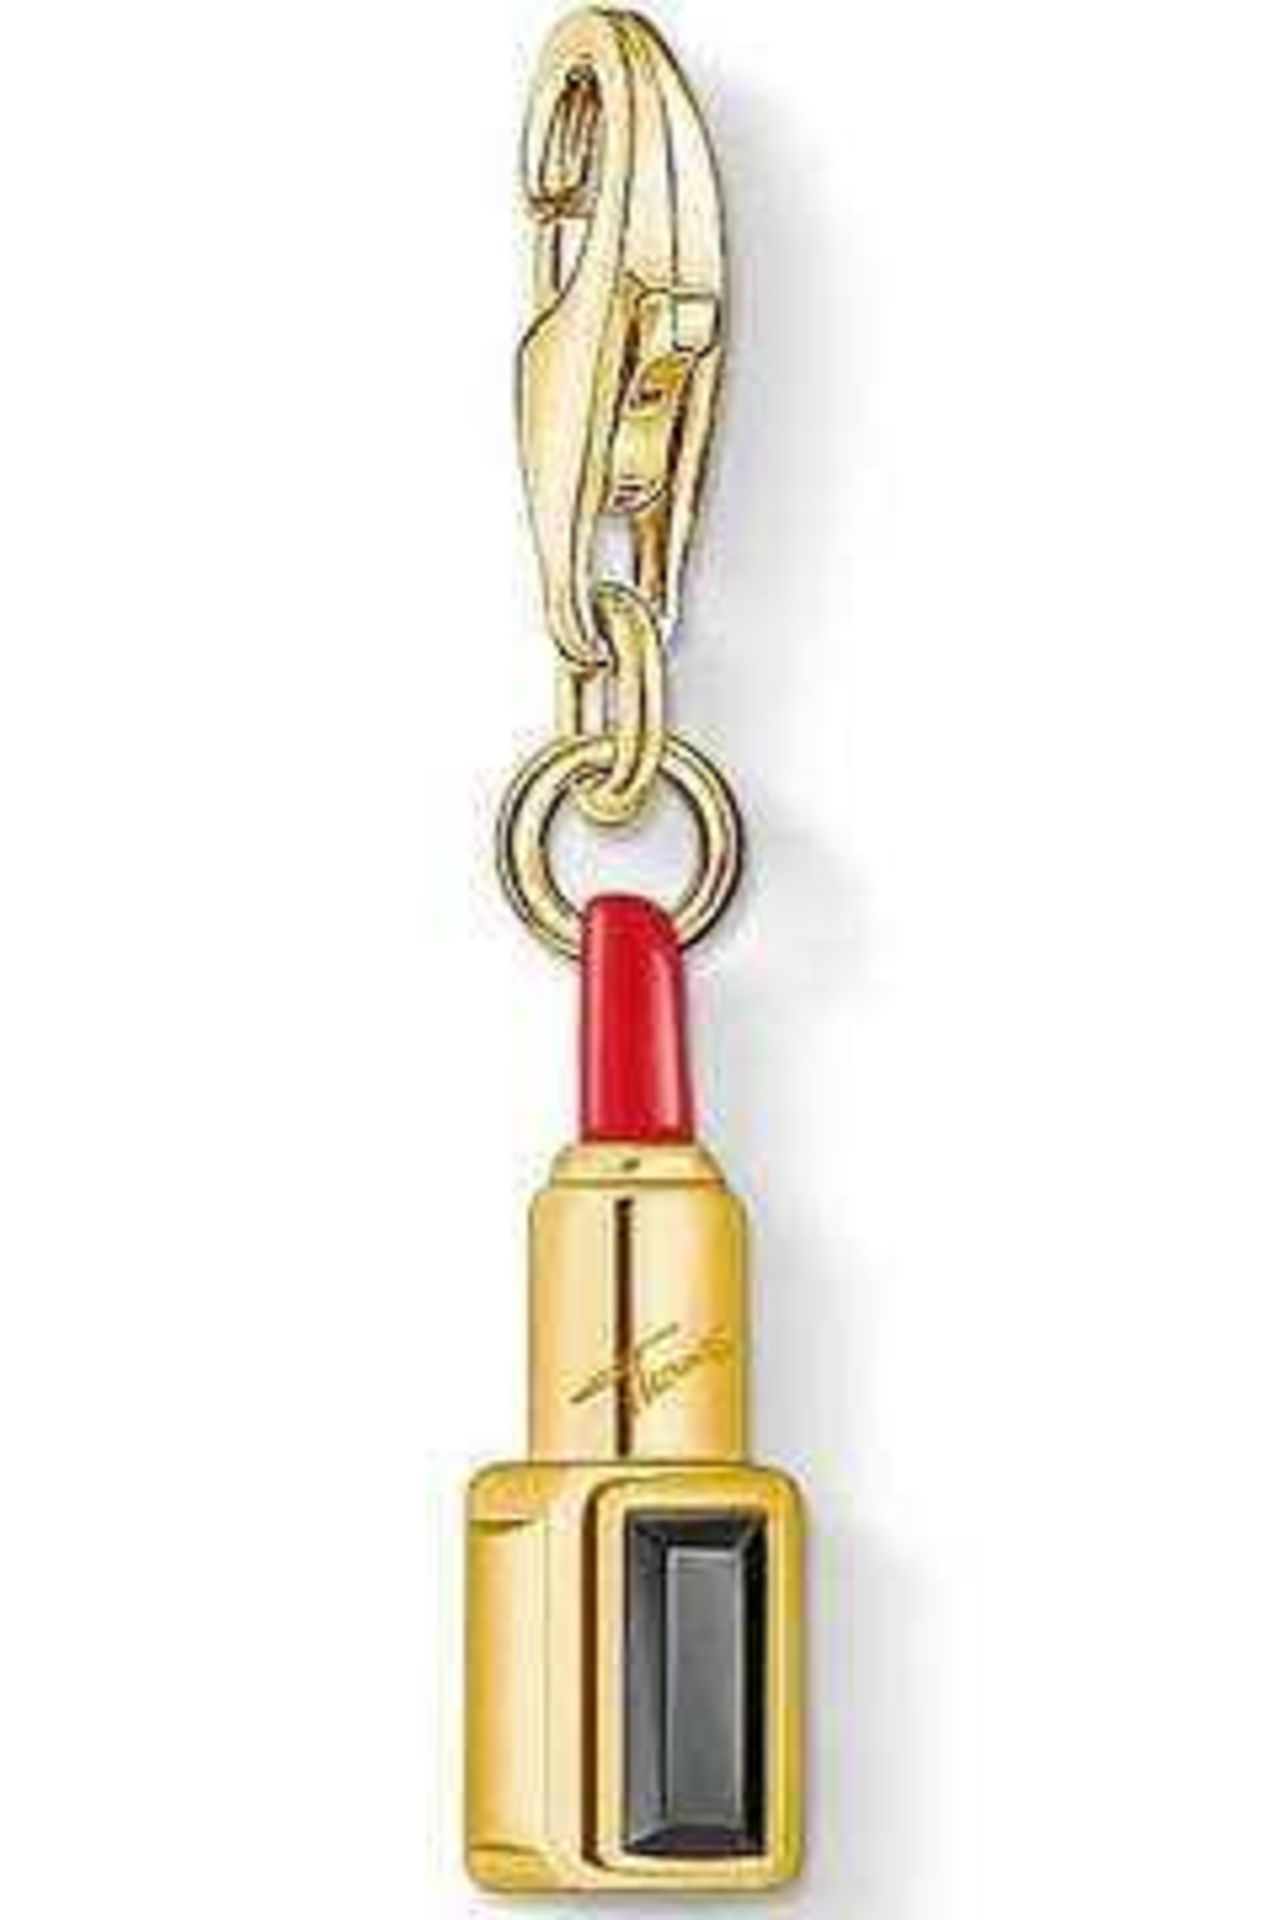 RRP £110 2 Bagged John Lewis And Partners 1750 Lipstick Gold Black And Red Designer Bracelet Charm